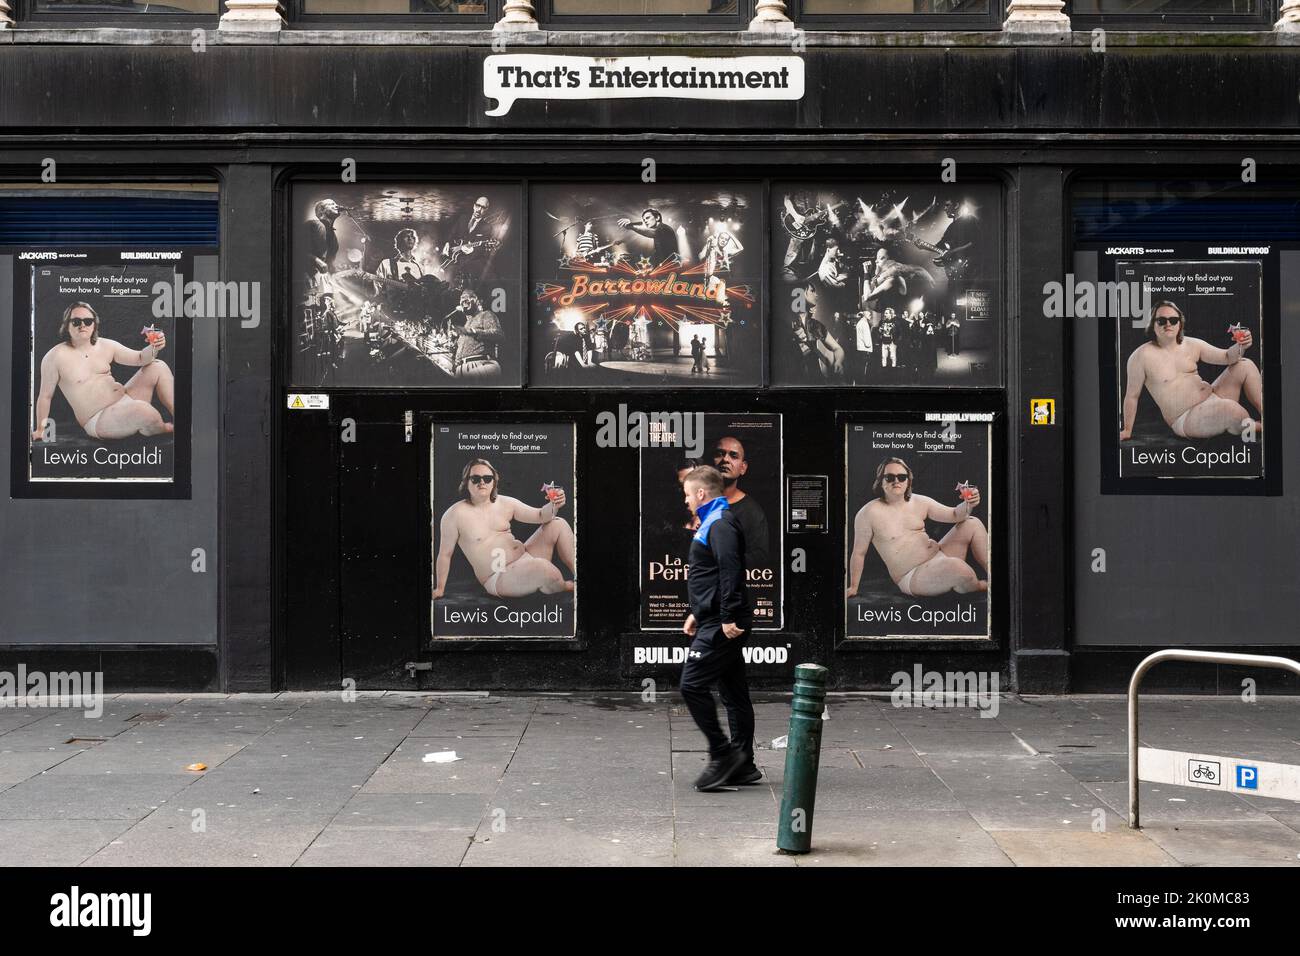 Lewis Capaldi promotional posters for new single 'Forget Me' on display in Glasgow, Scotland, UK Stock Photo